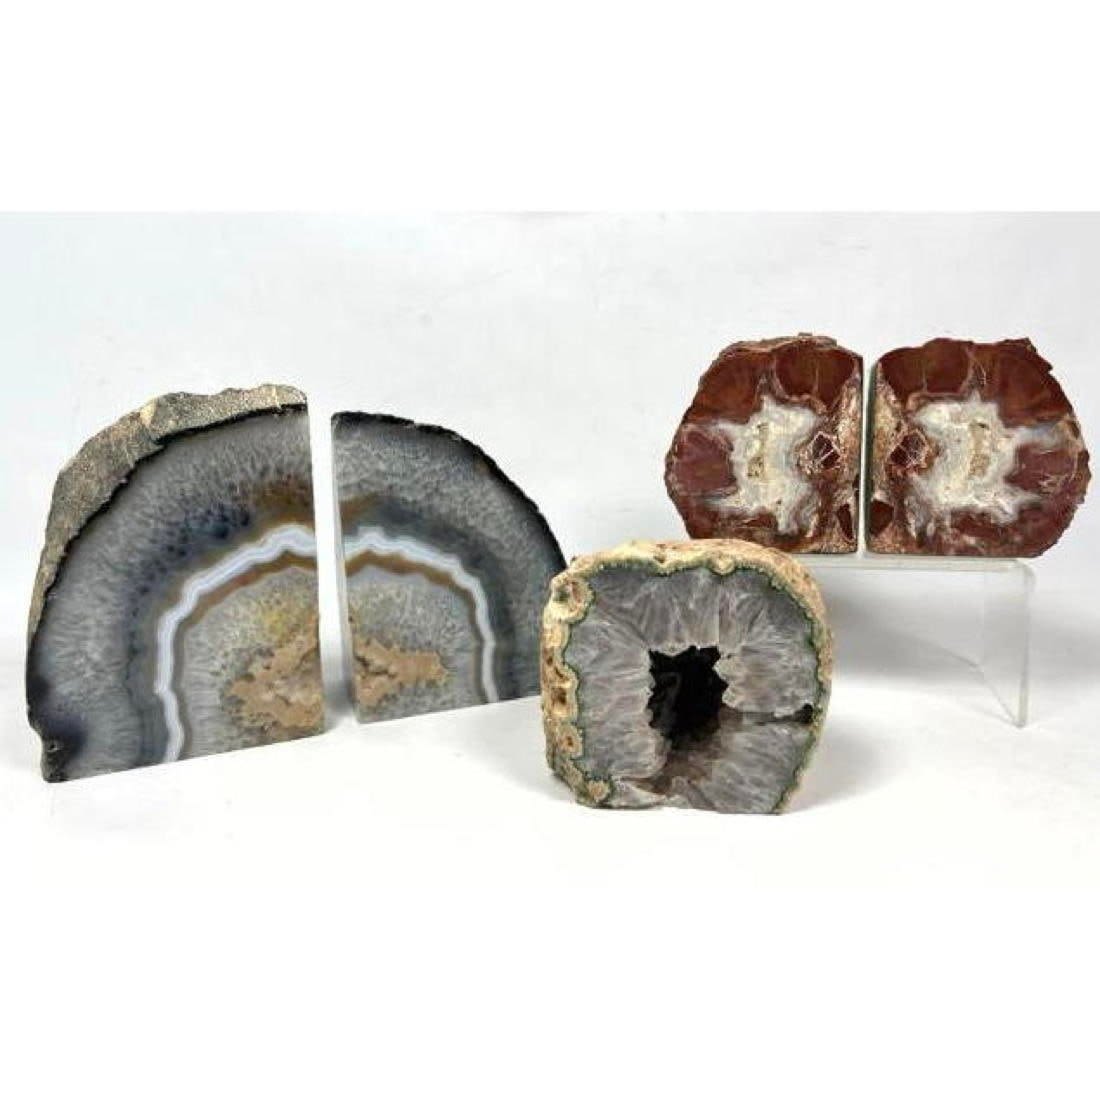 Geode Lot 2 Pairs of Bookends 3cf34e